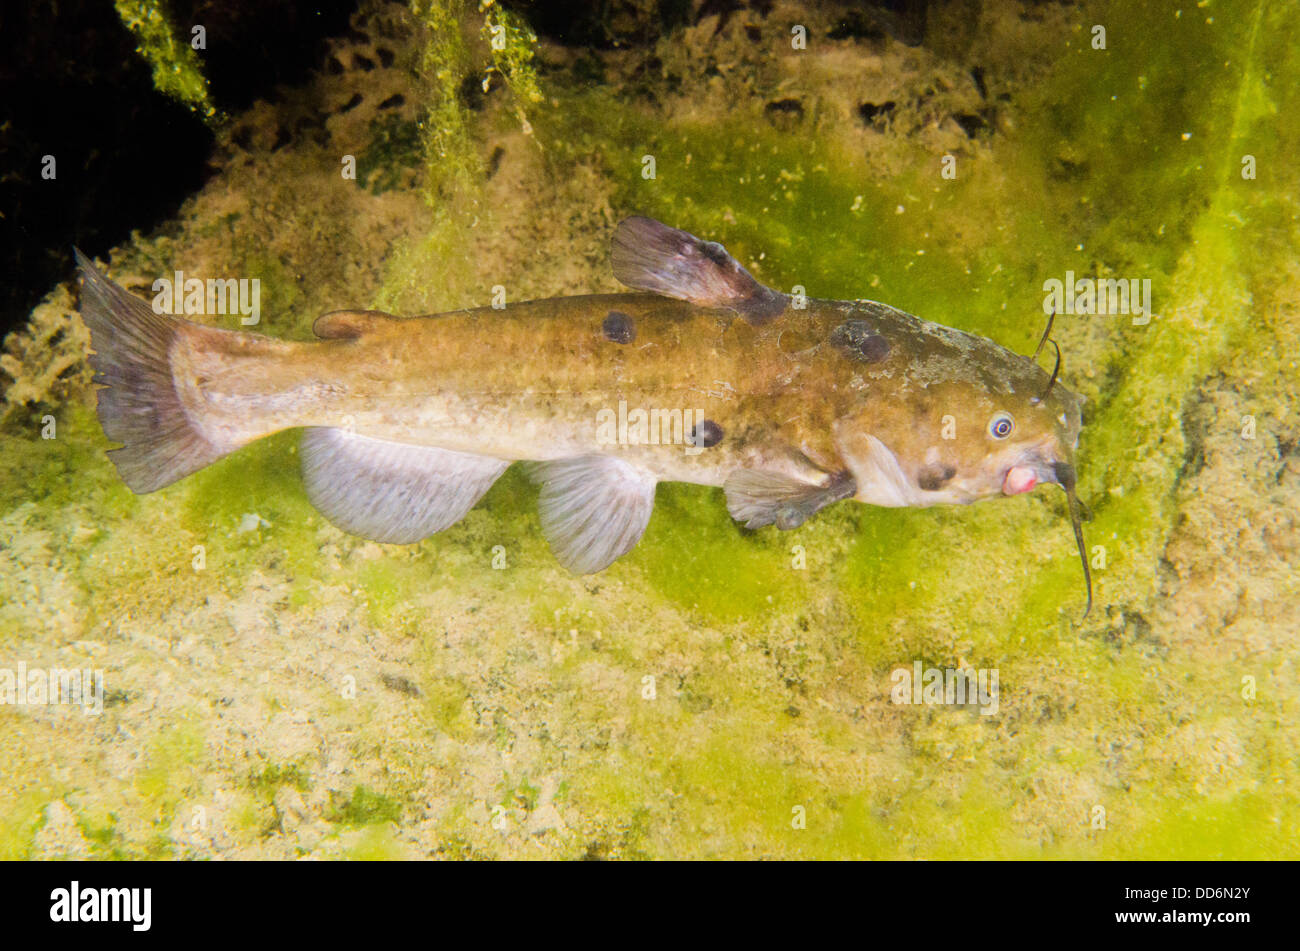 A Black Bullhead freshwater fish, Ameiurus melas, showing some tumors hunts for prey in the waters of an abandoned quarry. Stock Photo